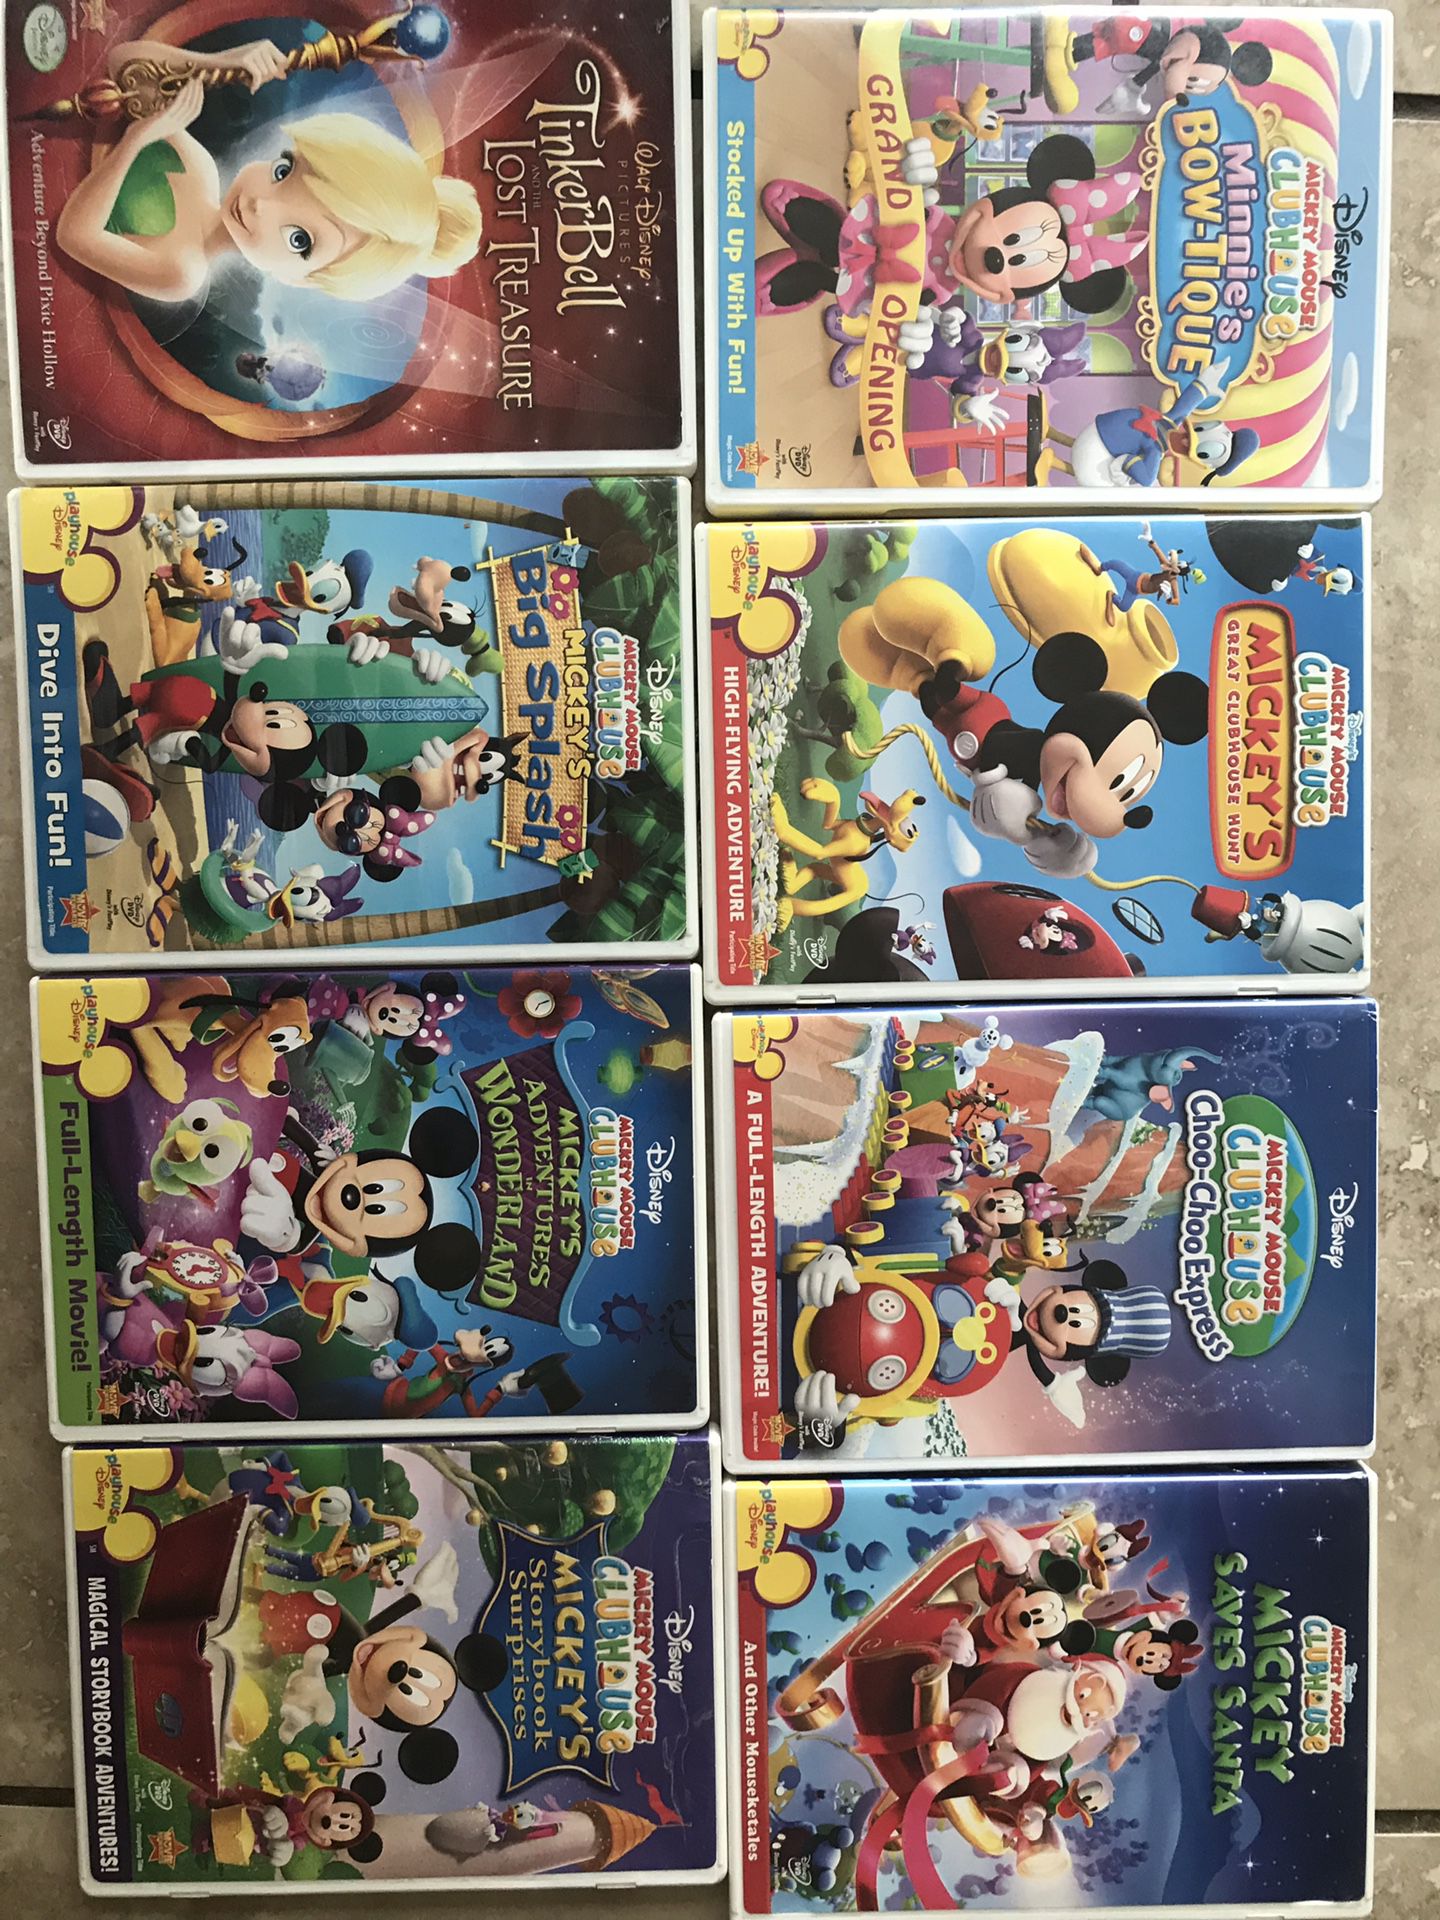 Mickey Mouse clubhouse dvd set for Sale in Bakersfield, CA - OfferUp